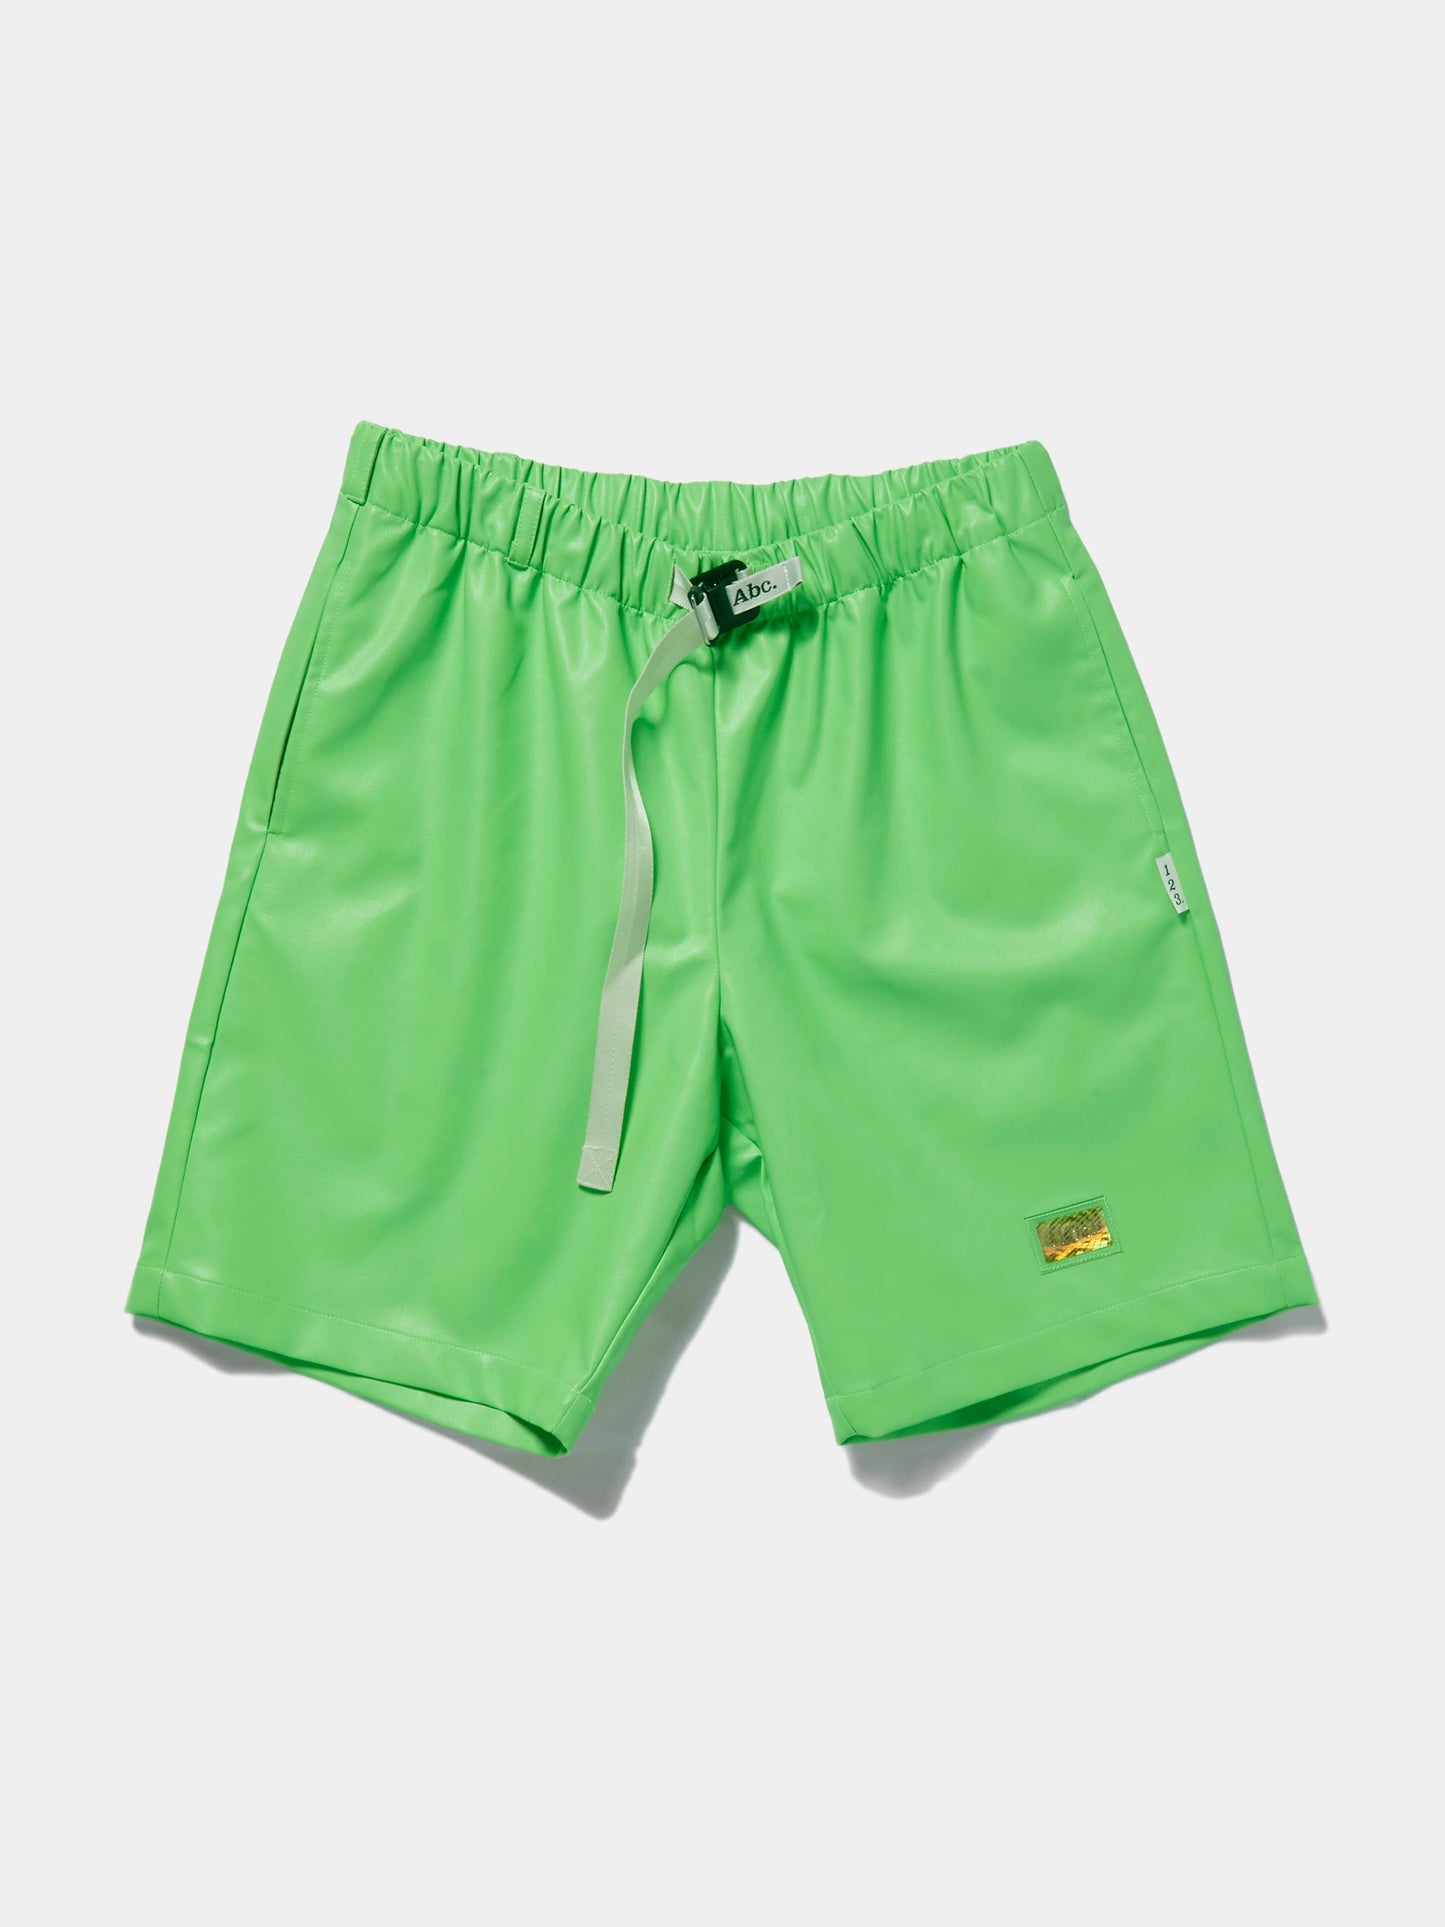 Faux Leather Work Shorts (Citrine Green)